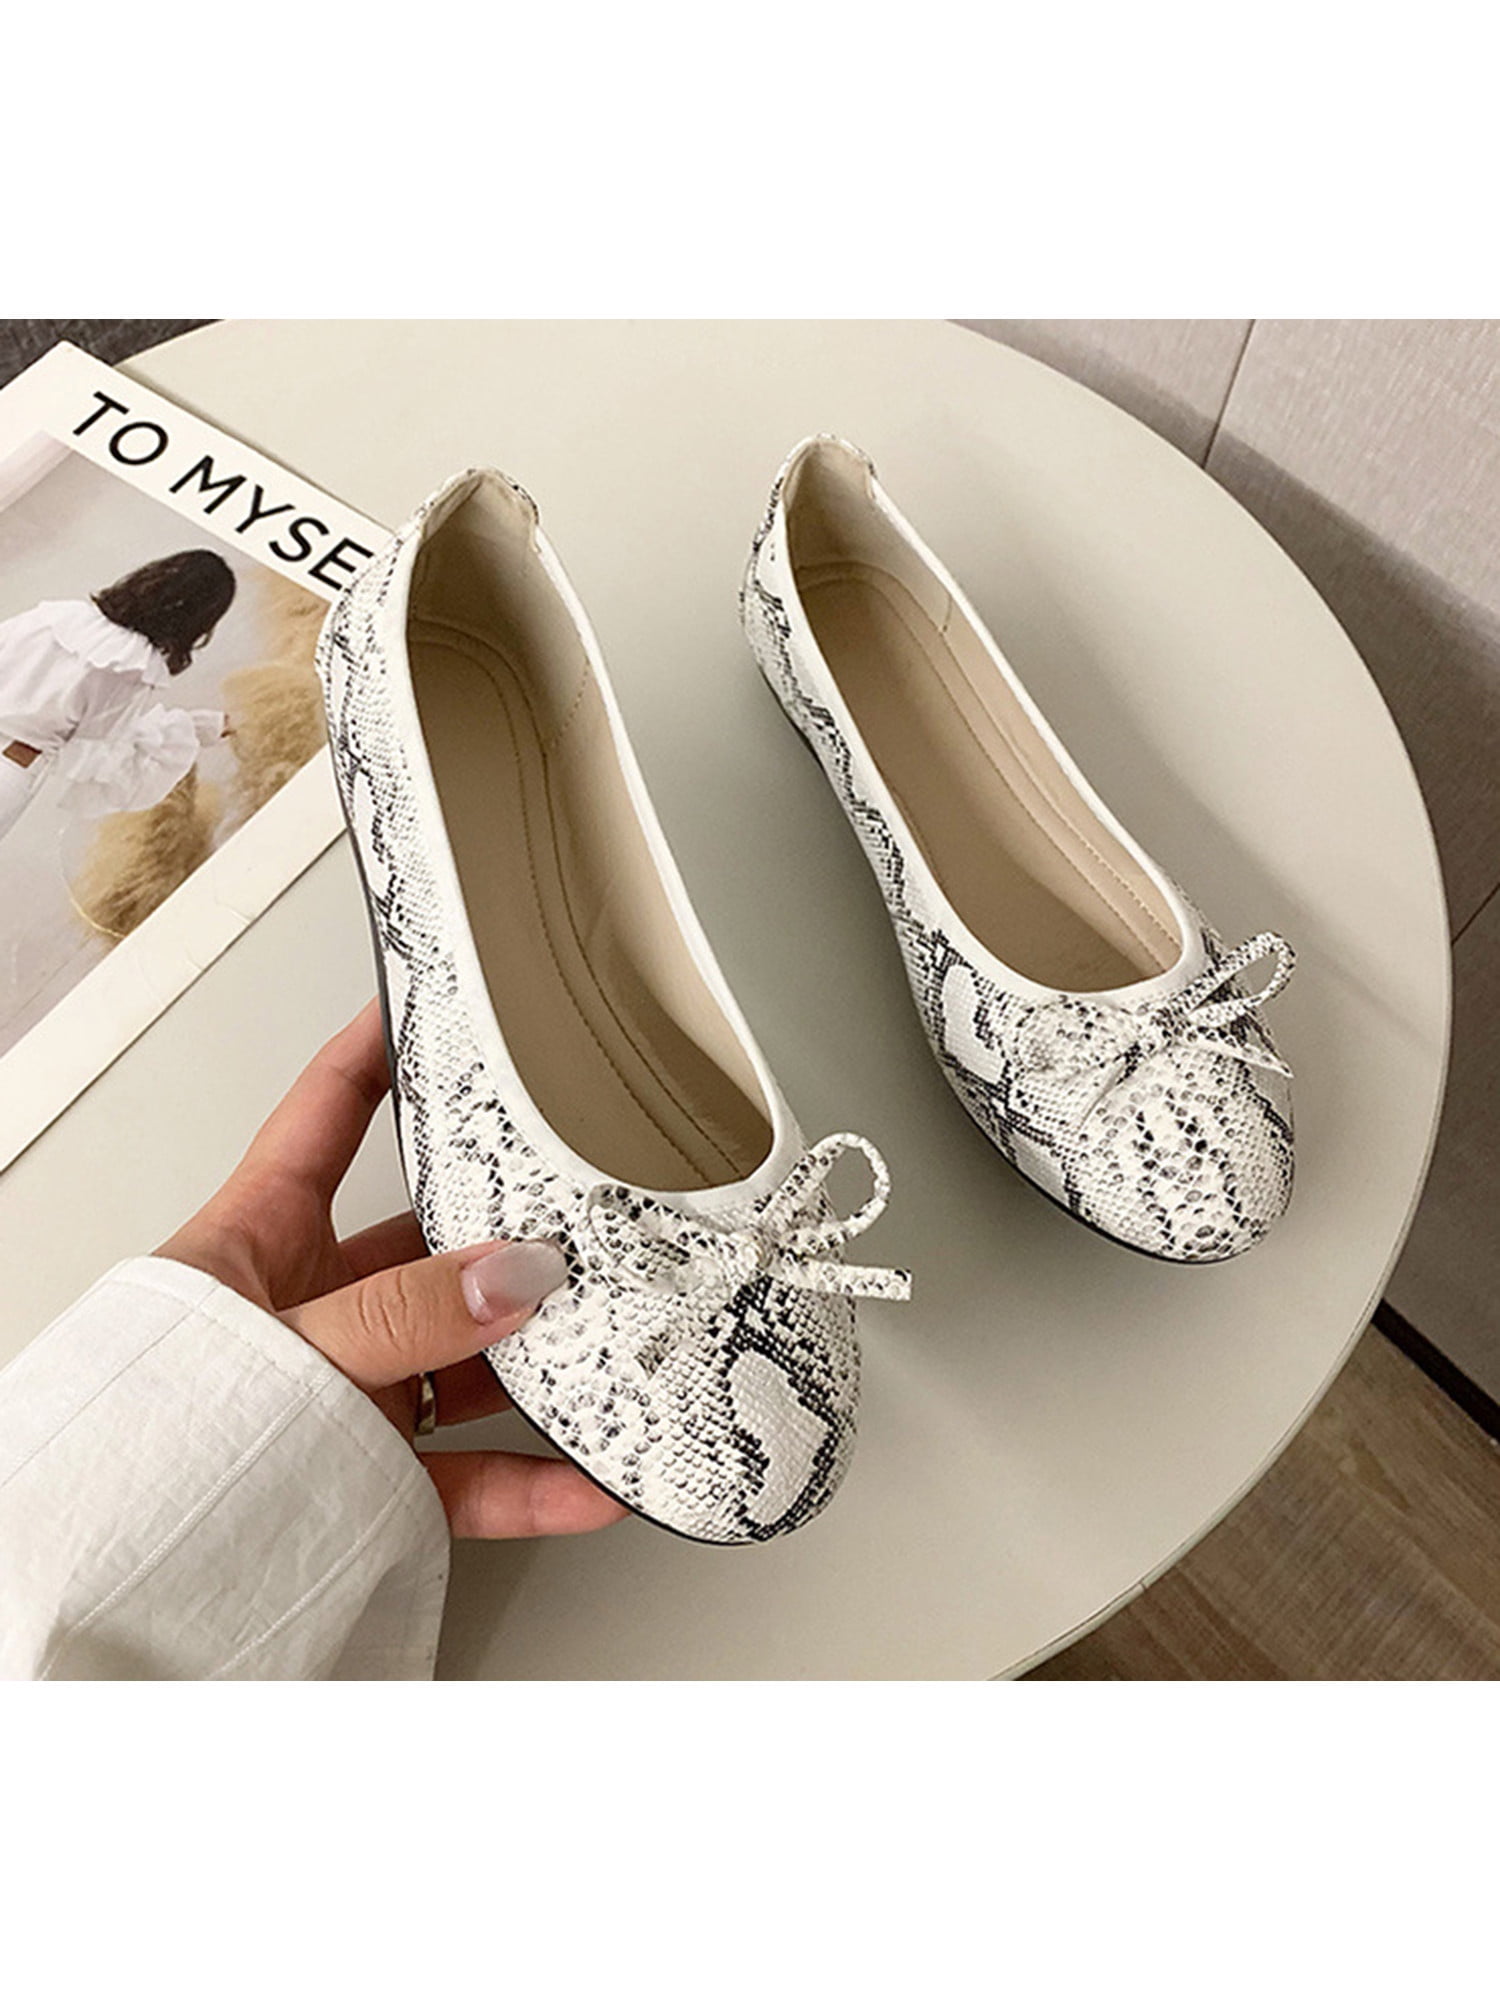 Ladies Womens Flats Casual Slip On Diamante Loafers Ballerinas Pumps Shoes Size 